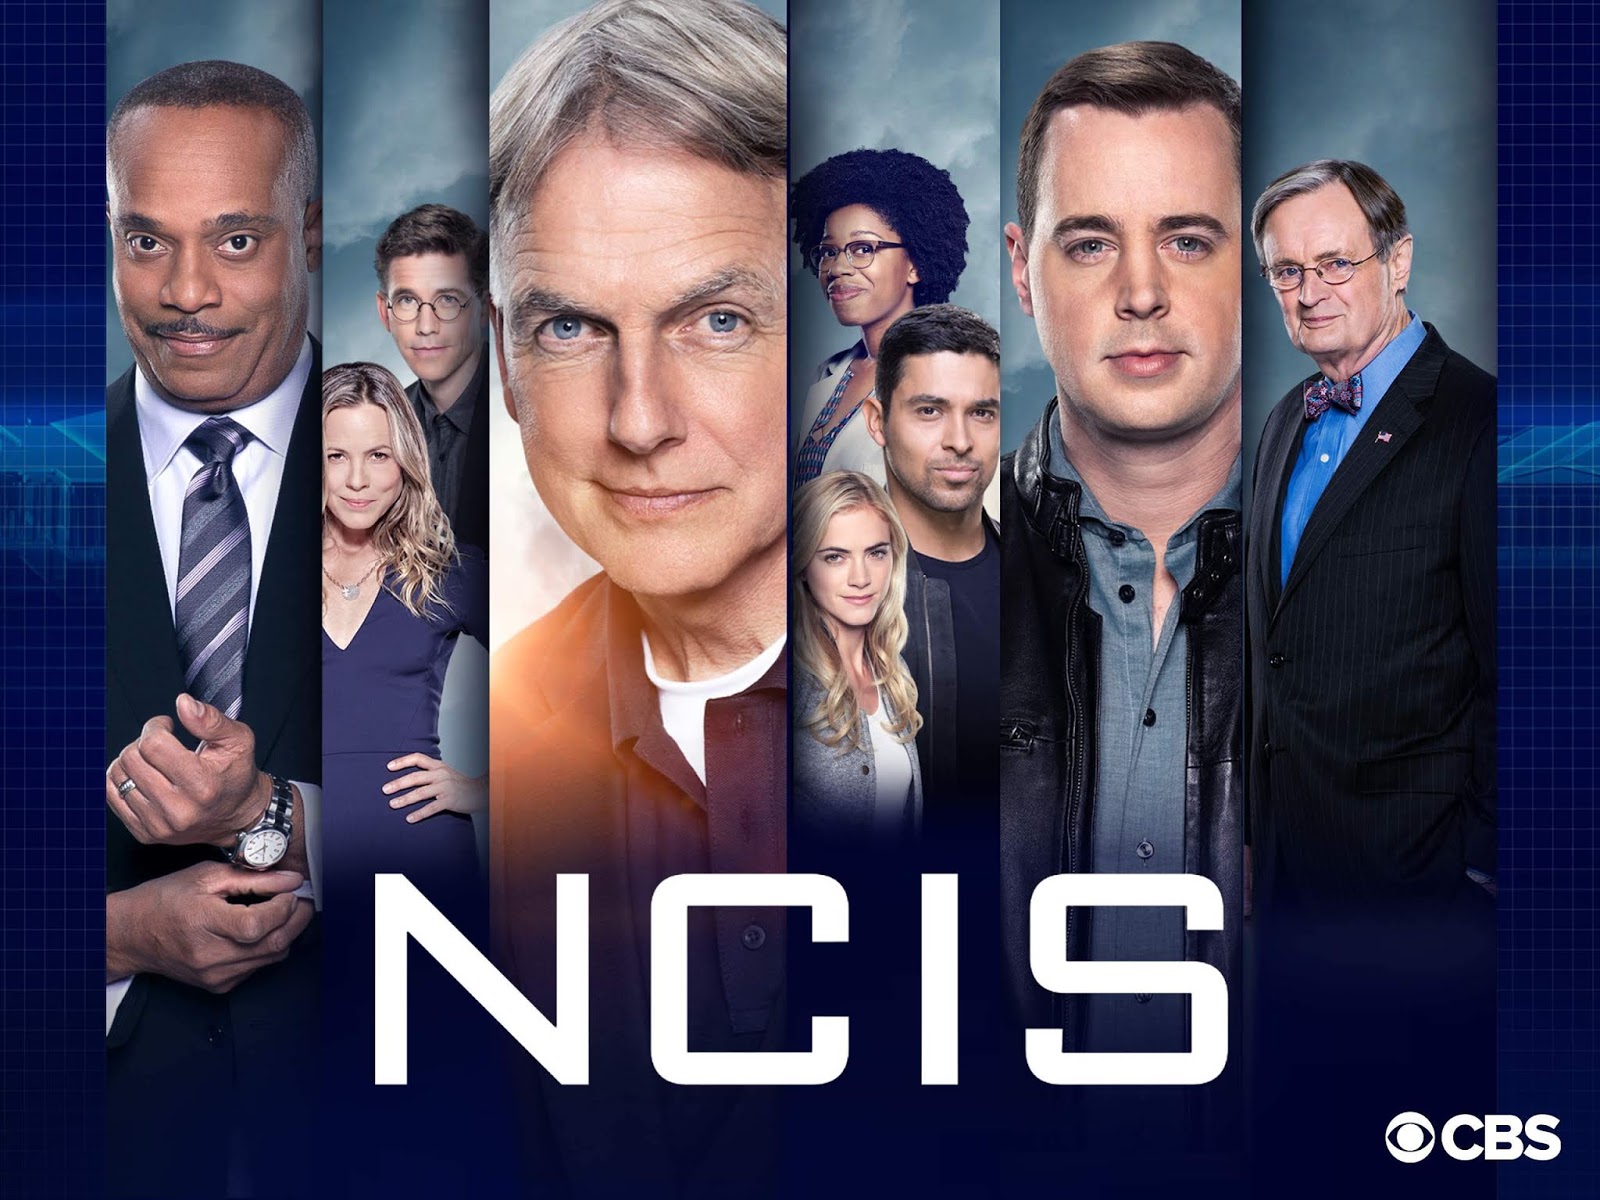 NCIS Renewed for Season 17 by CBS - The TV Ratings Guide